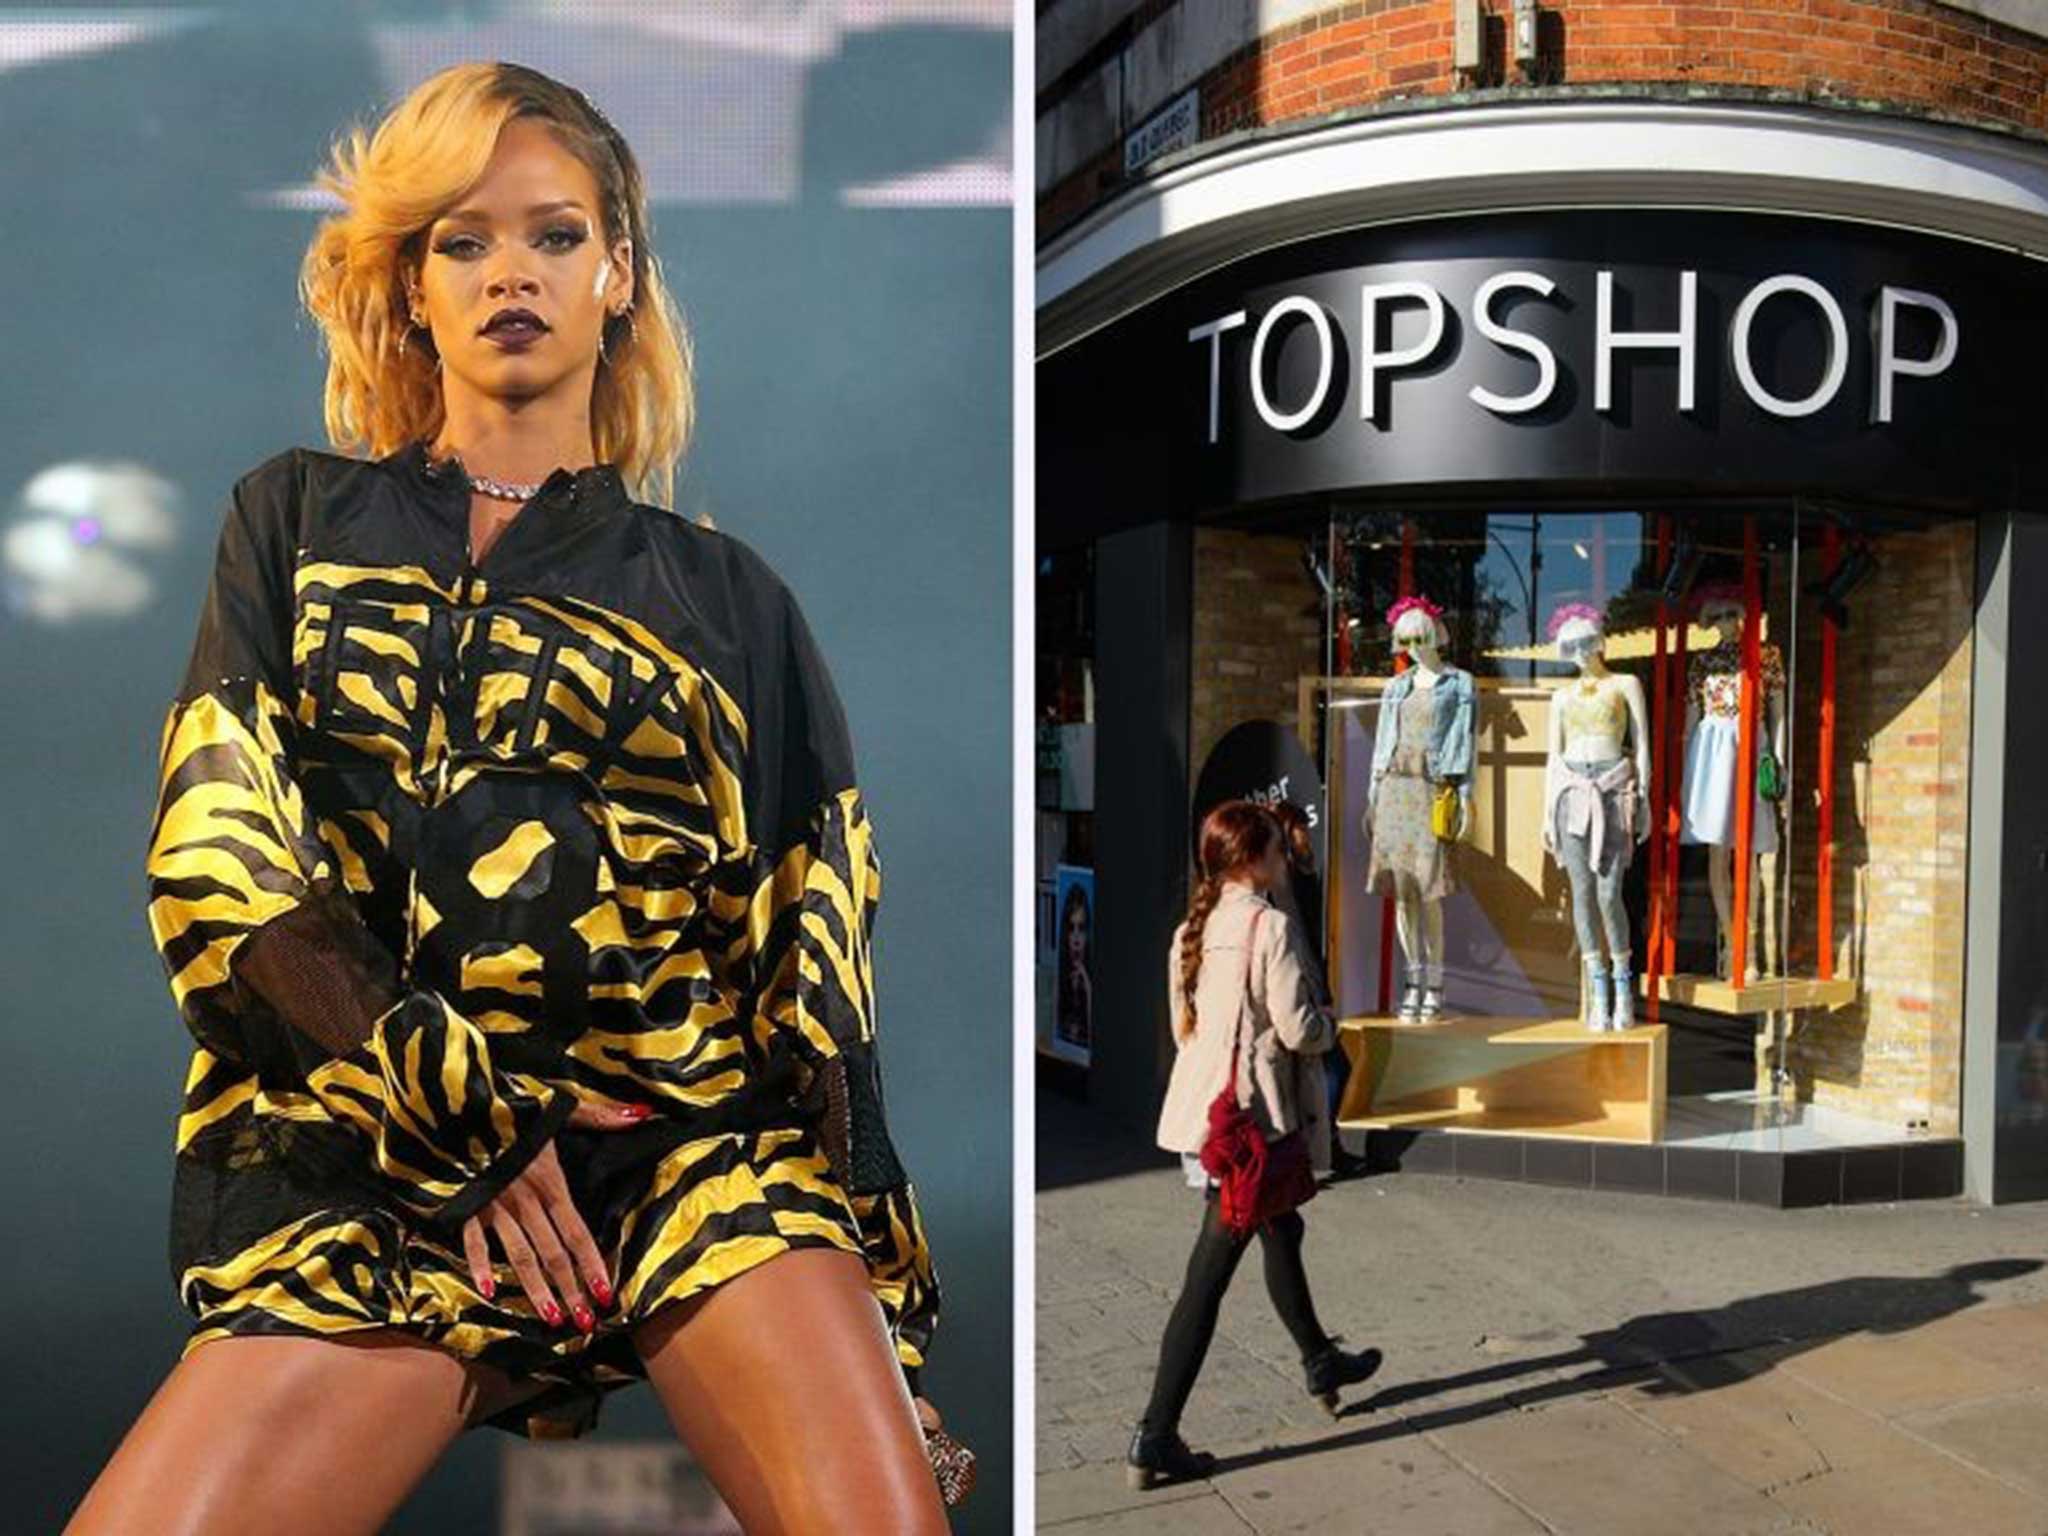 A court dismissed Topshop's appeal against the use of Rihanna's image on t-shirts